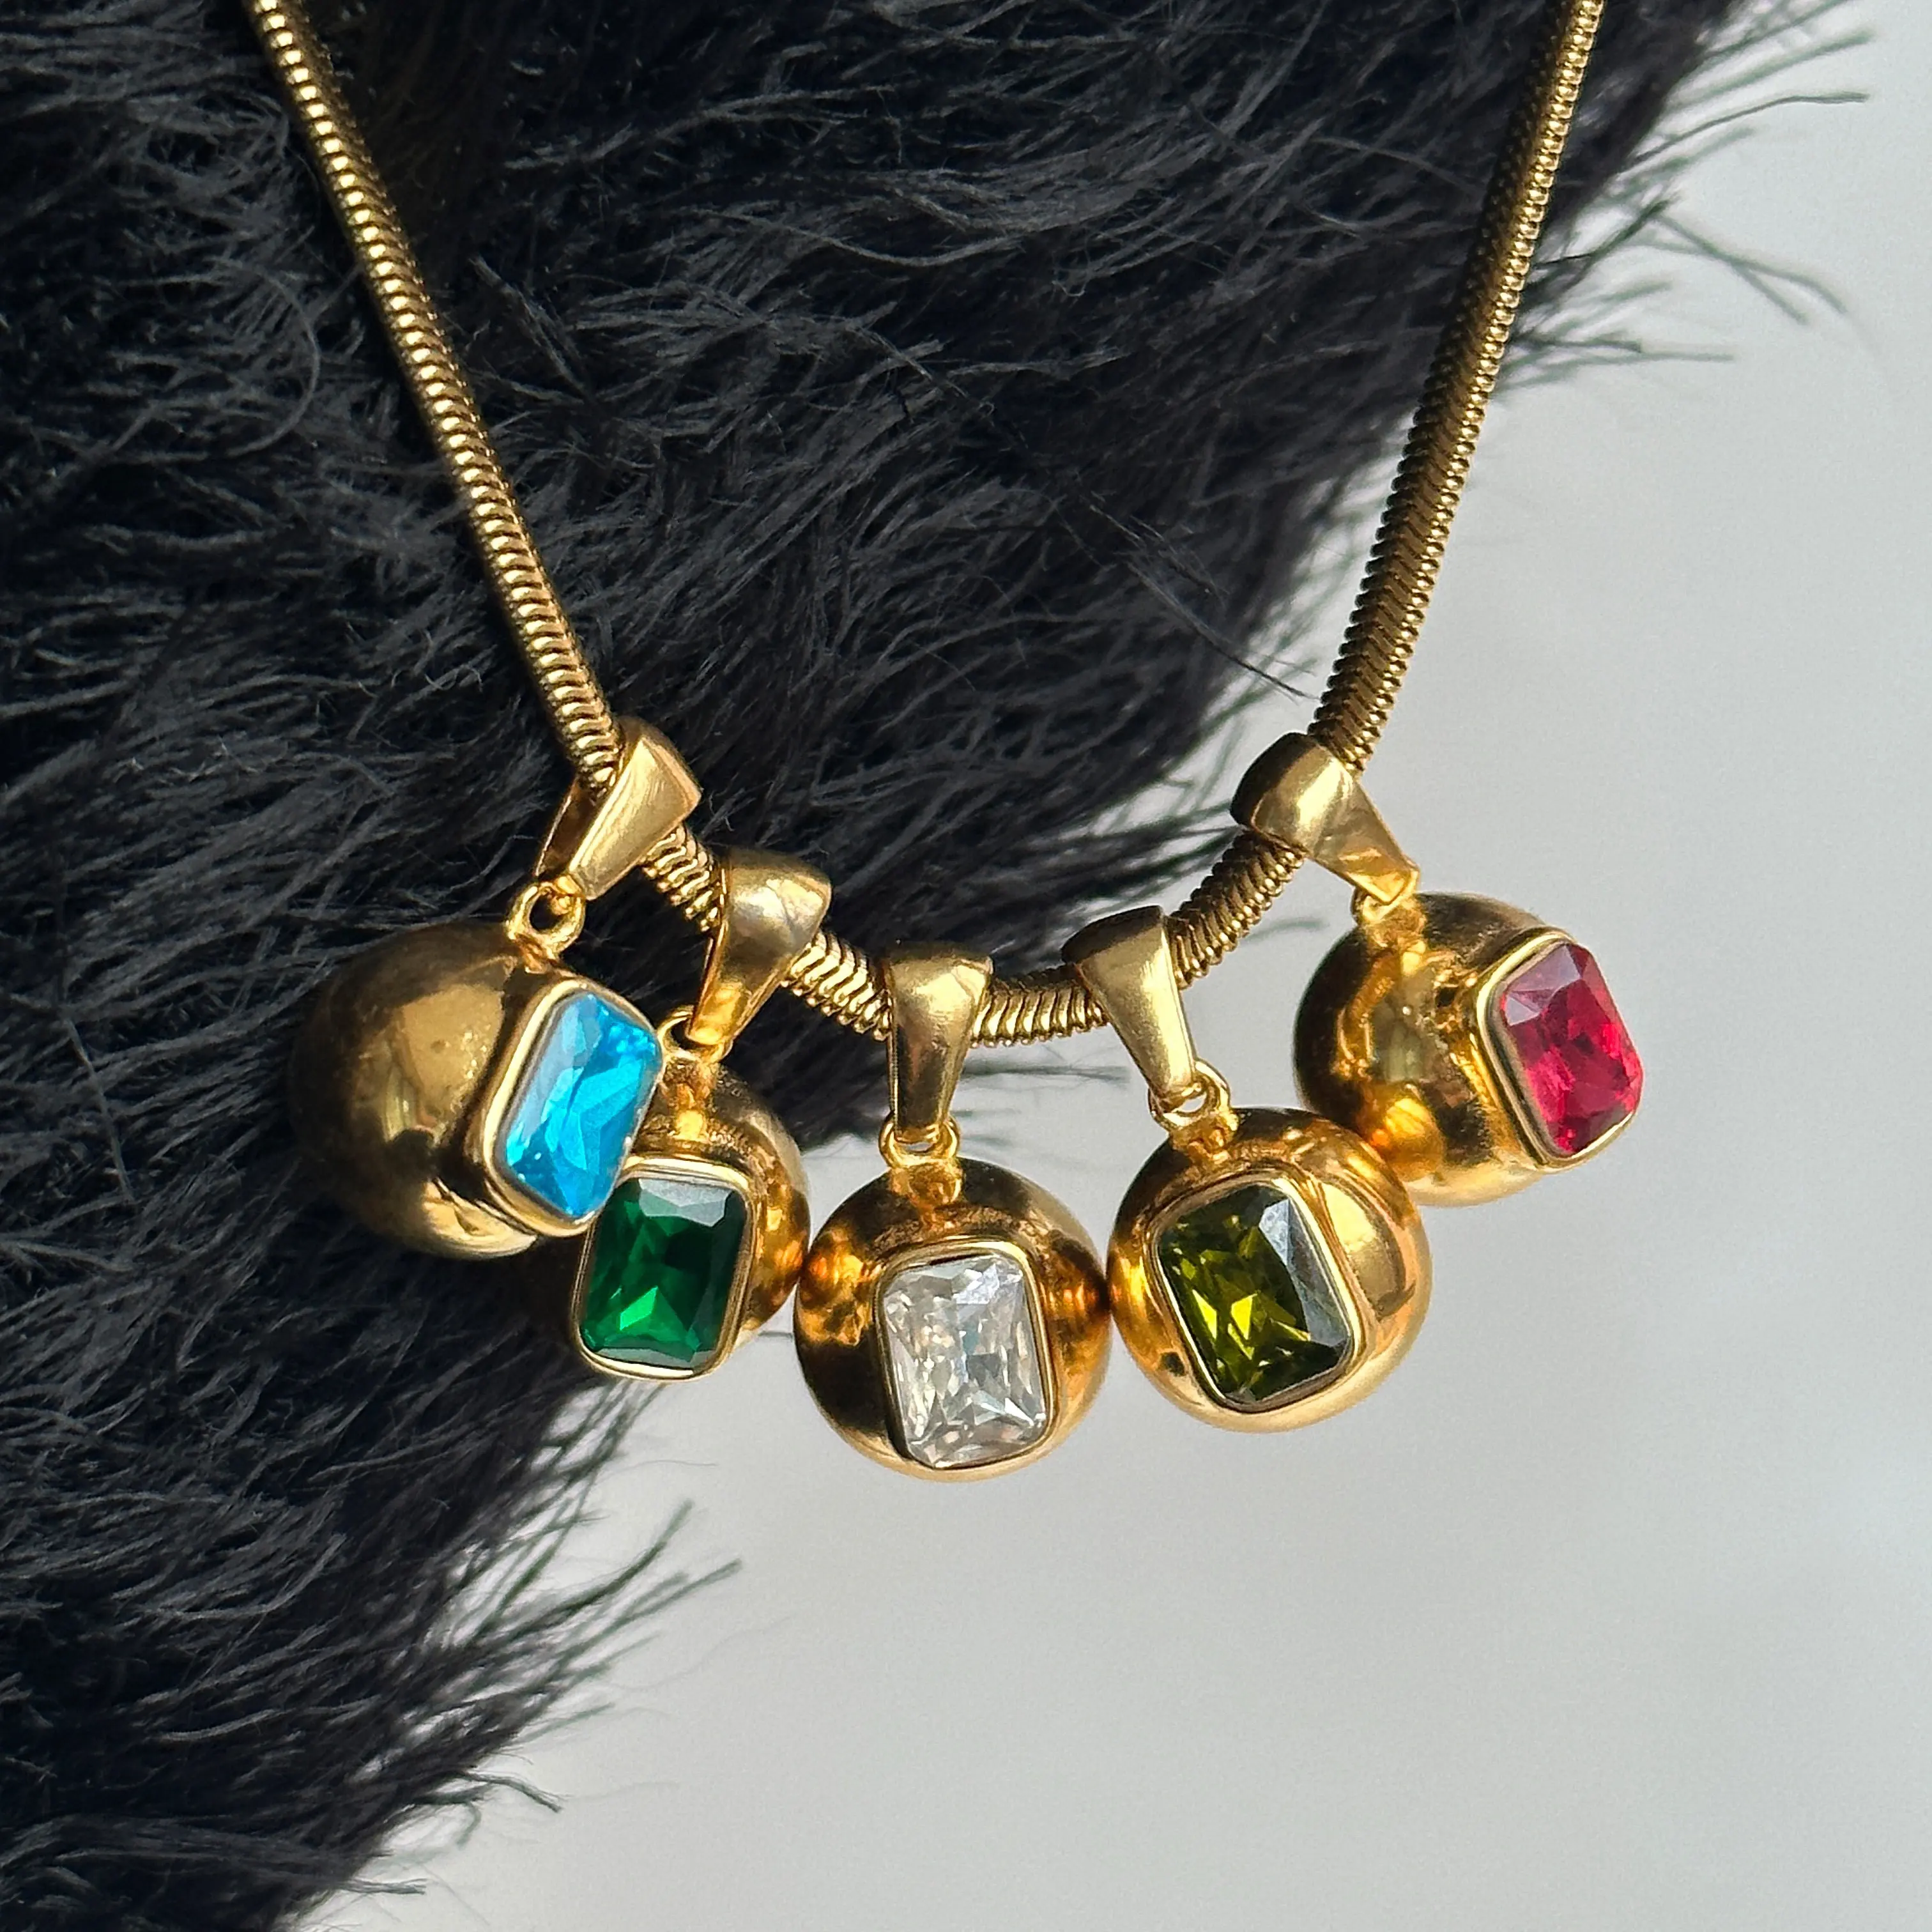 2022 Dazan New 18k Gold Plated Tarnish Free Stainless Steel Unique Design Solid Ball Emerald Colorful Zircon Pendant Necklace